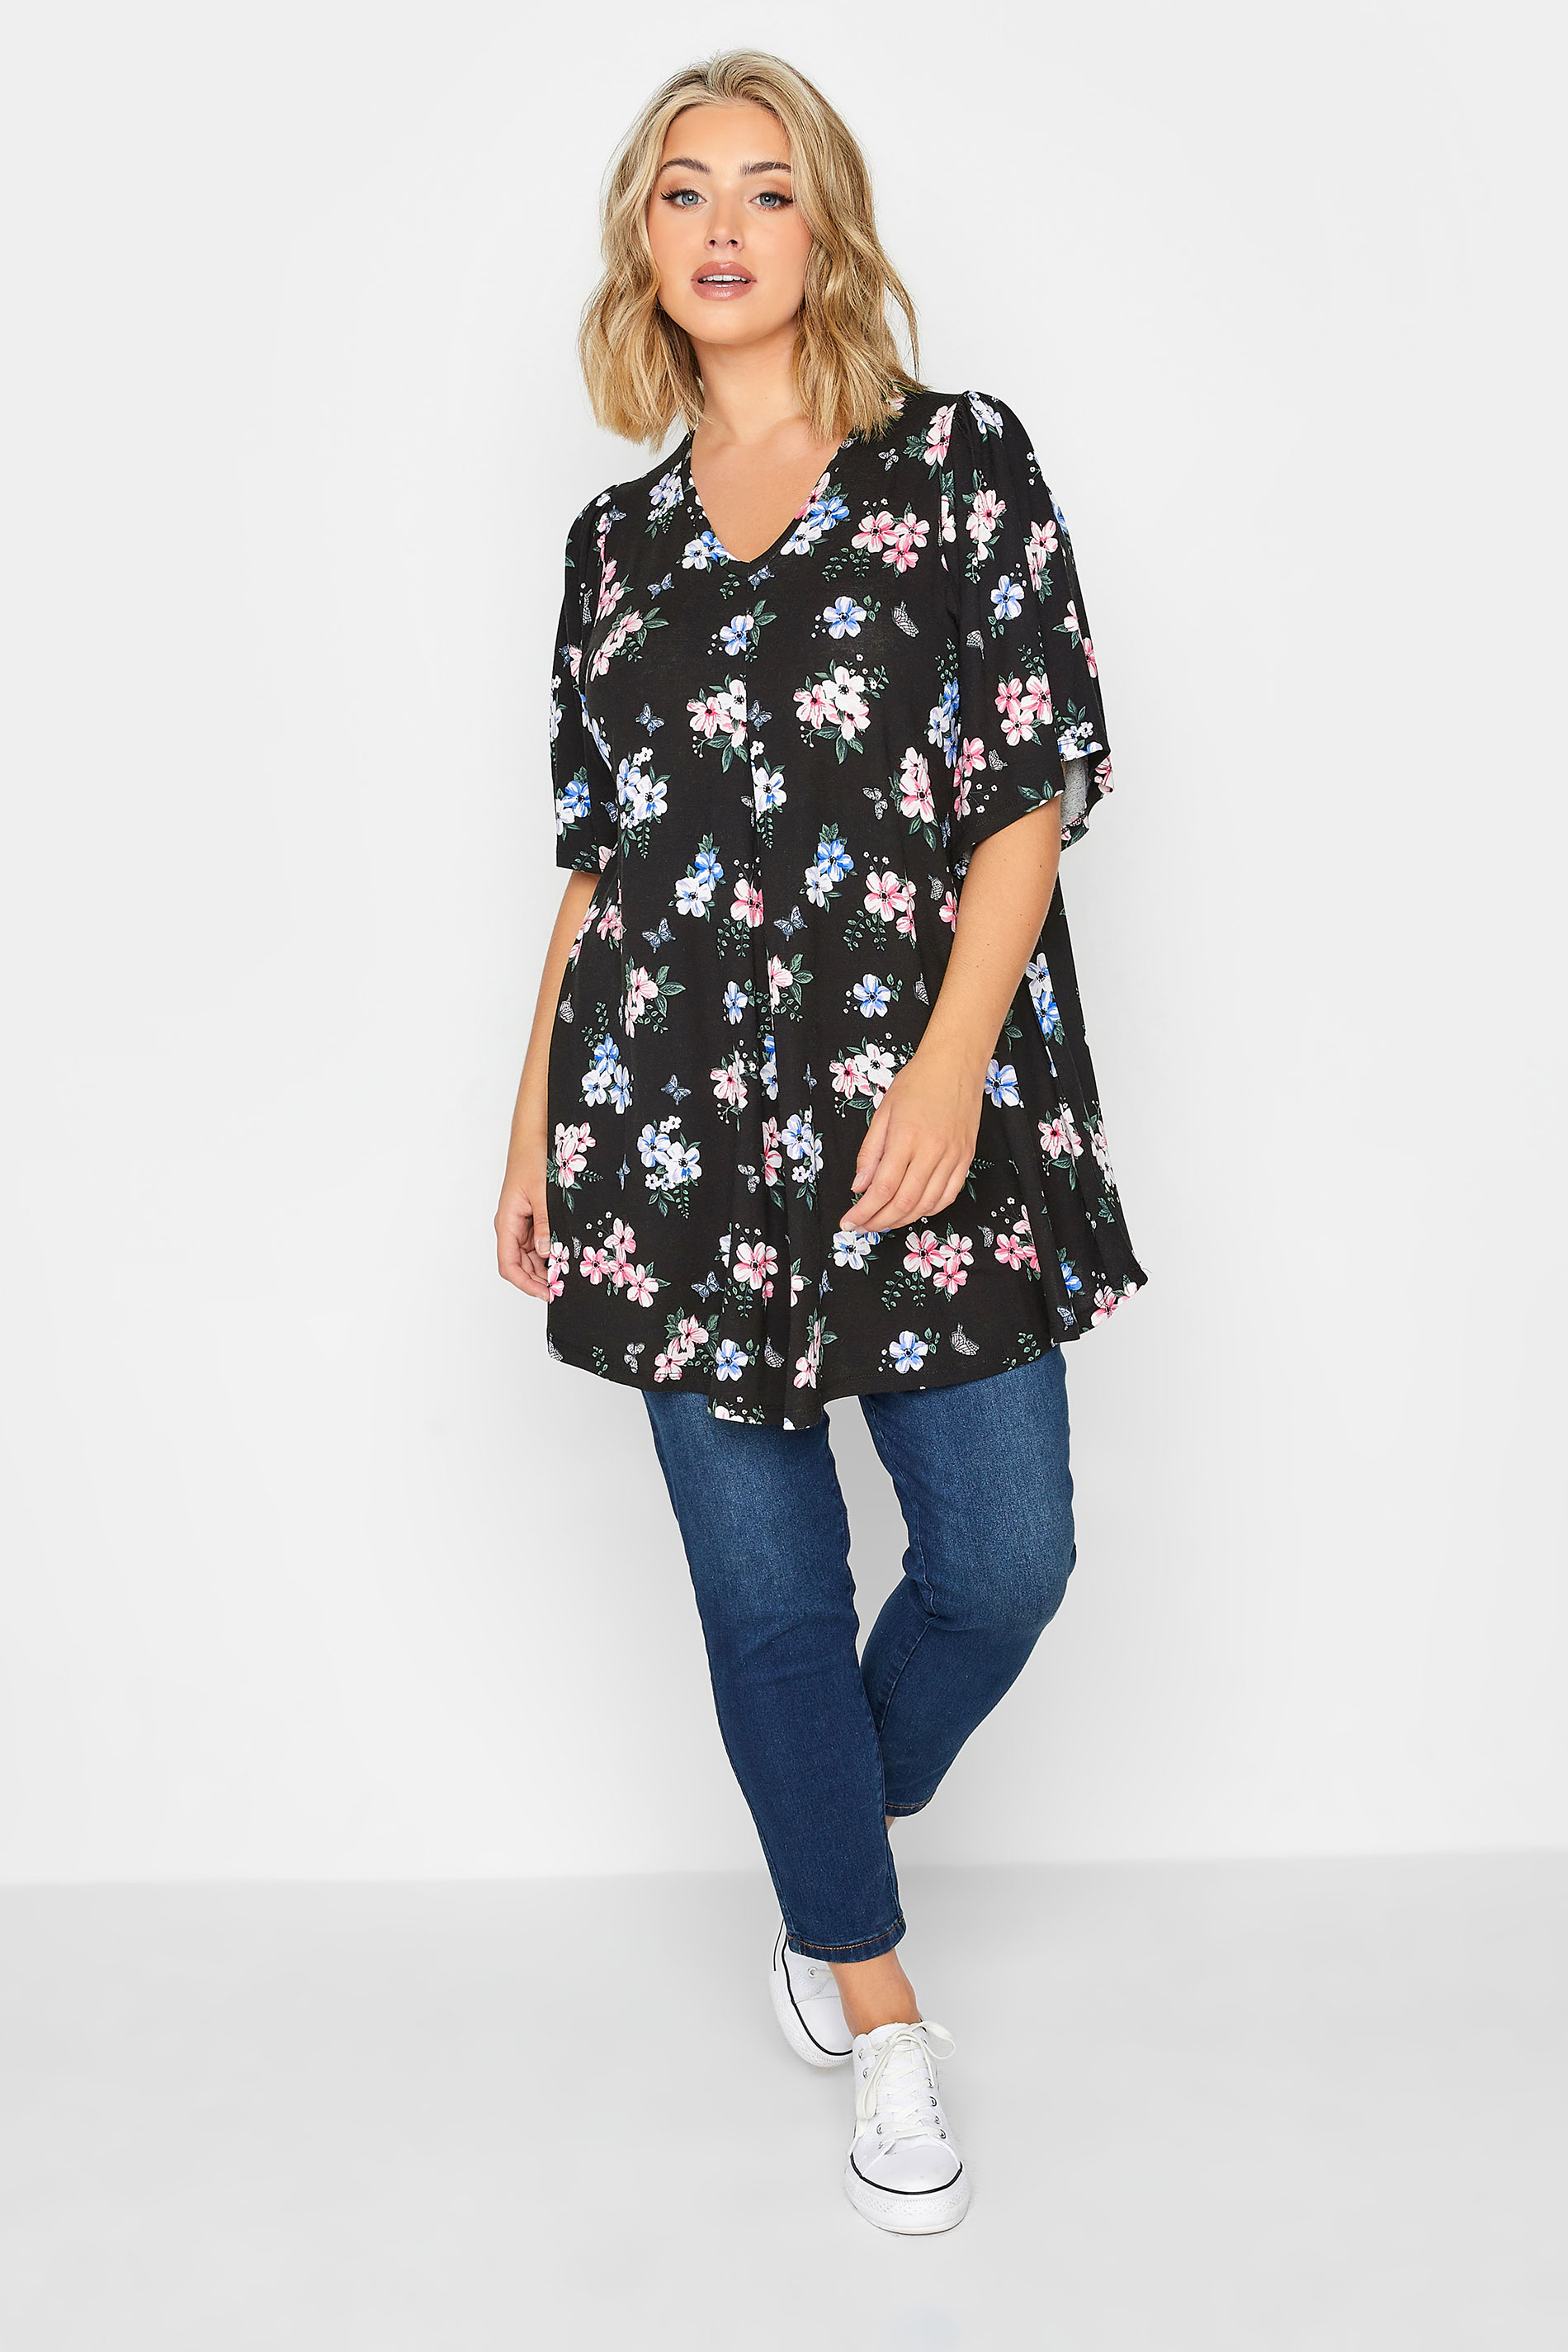 YOURS Curve Plus Size Black Floral Angel Sleeve Top | Yours Clothing  2